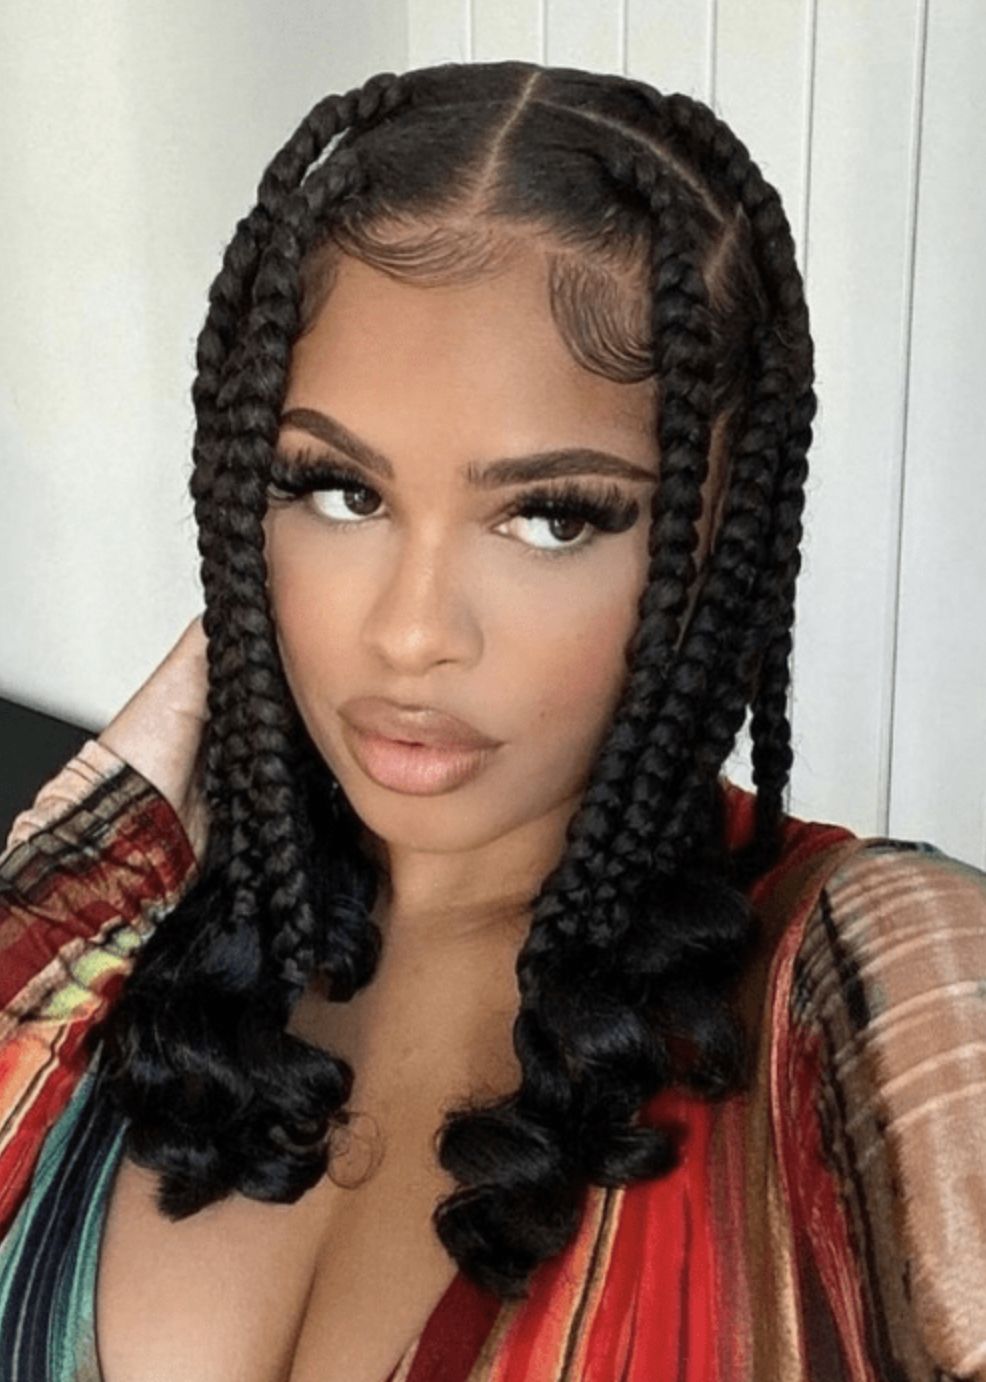 27 Braided Summer Hairstyles To Try This Summer 2022 Within Most Up To Date Big Braids Hairstyles For Medium Length Hair (View 23 of 25)